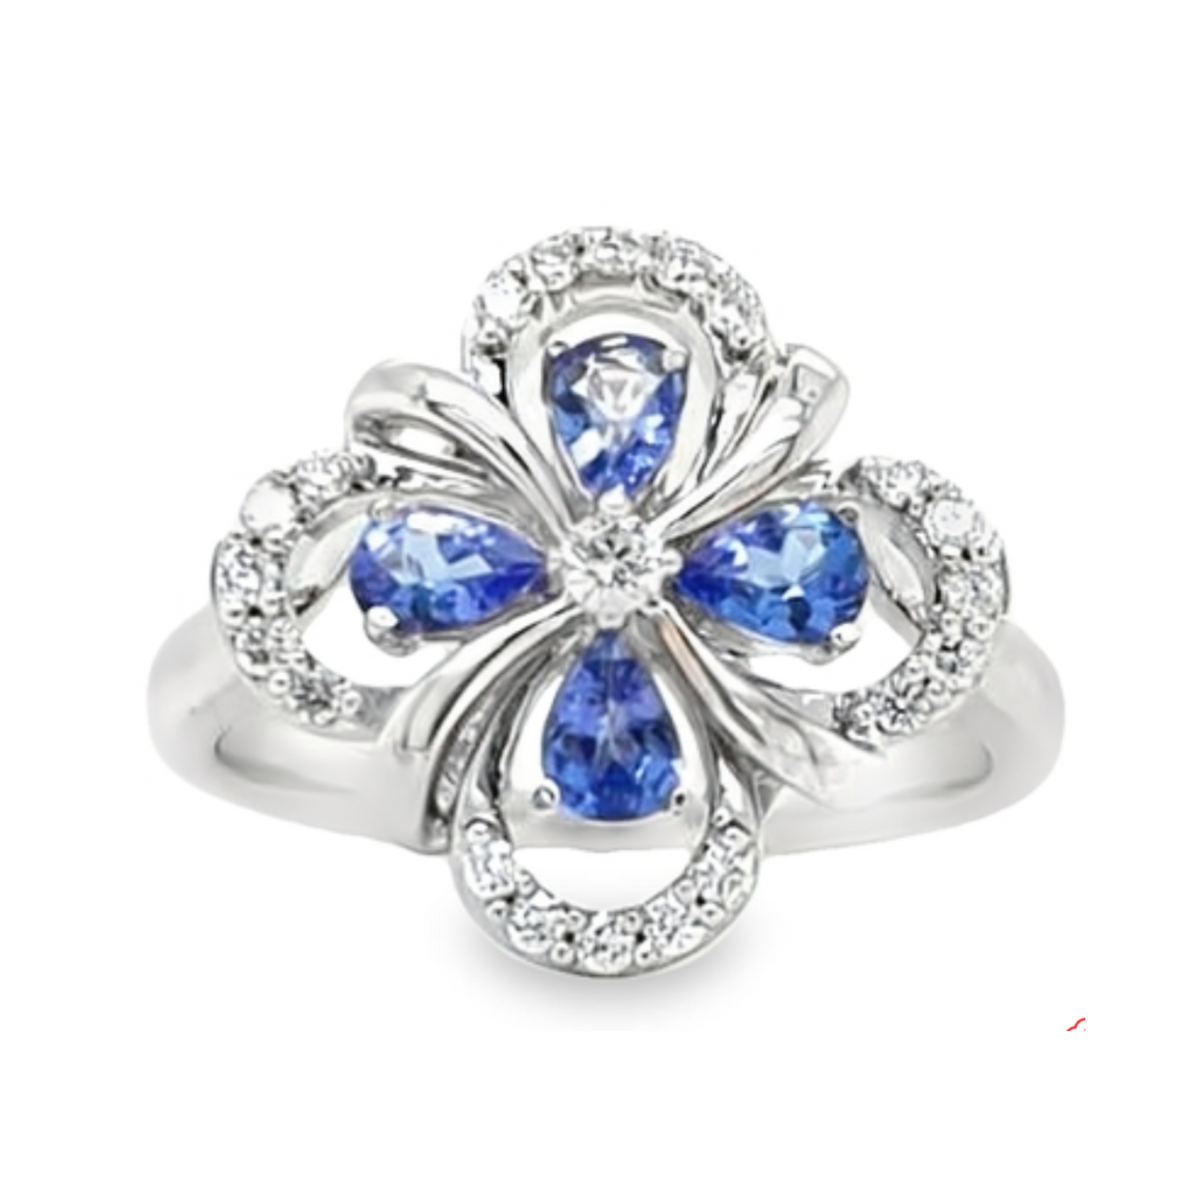 14K White Gold Pear Shape Tanzanite and Diamond Floral Inspired Ring